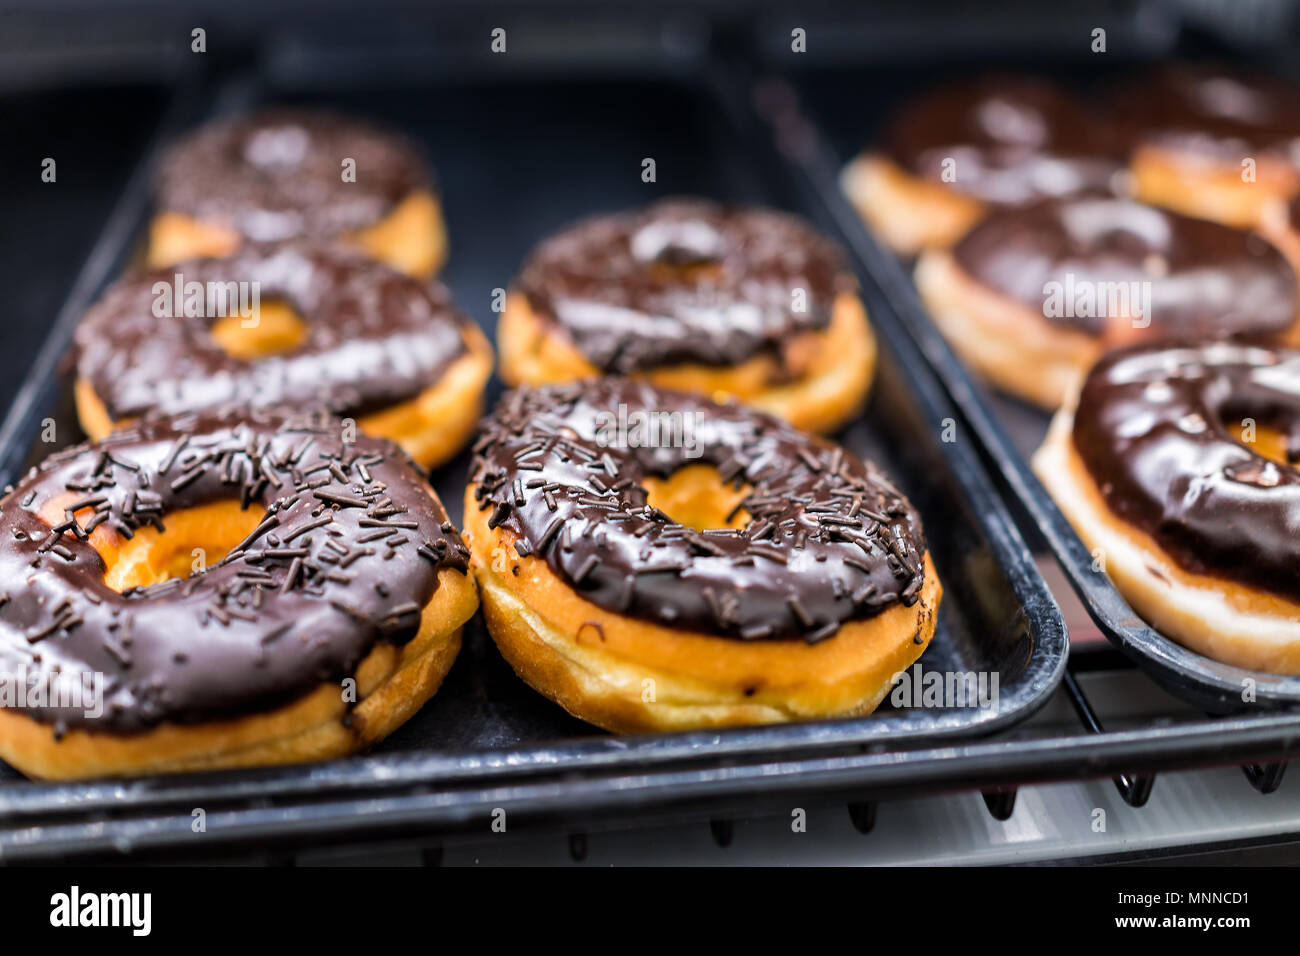 Chocolate icing donuts with sprinkles closeup on bakery tray, deep fried vanilla, delicious tasty with holes Stock Photo